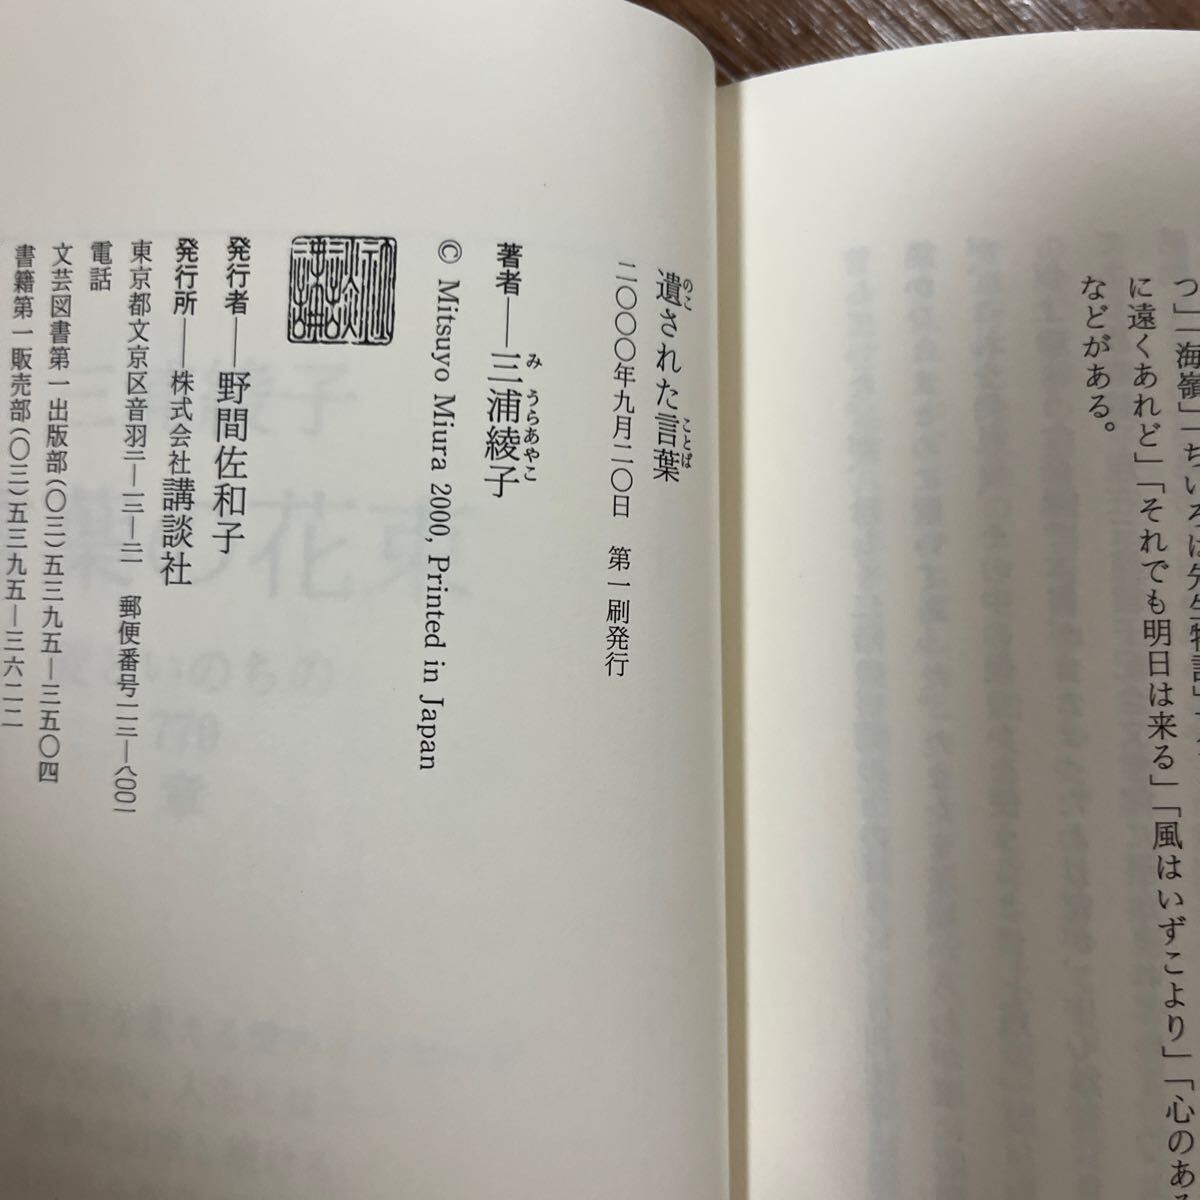 [ signature book@/. language / the first version ] Miura Ayako [. was done words ].. company obi attaching autograph book